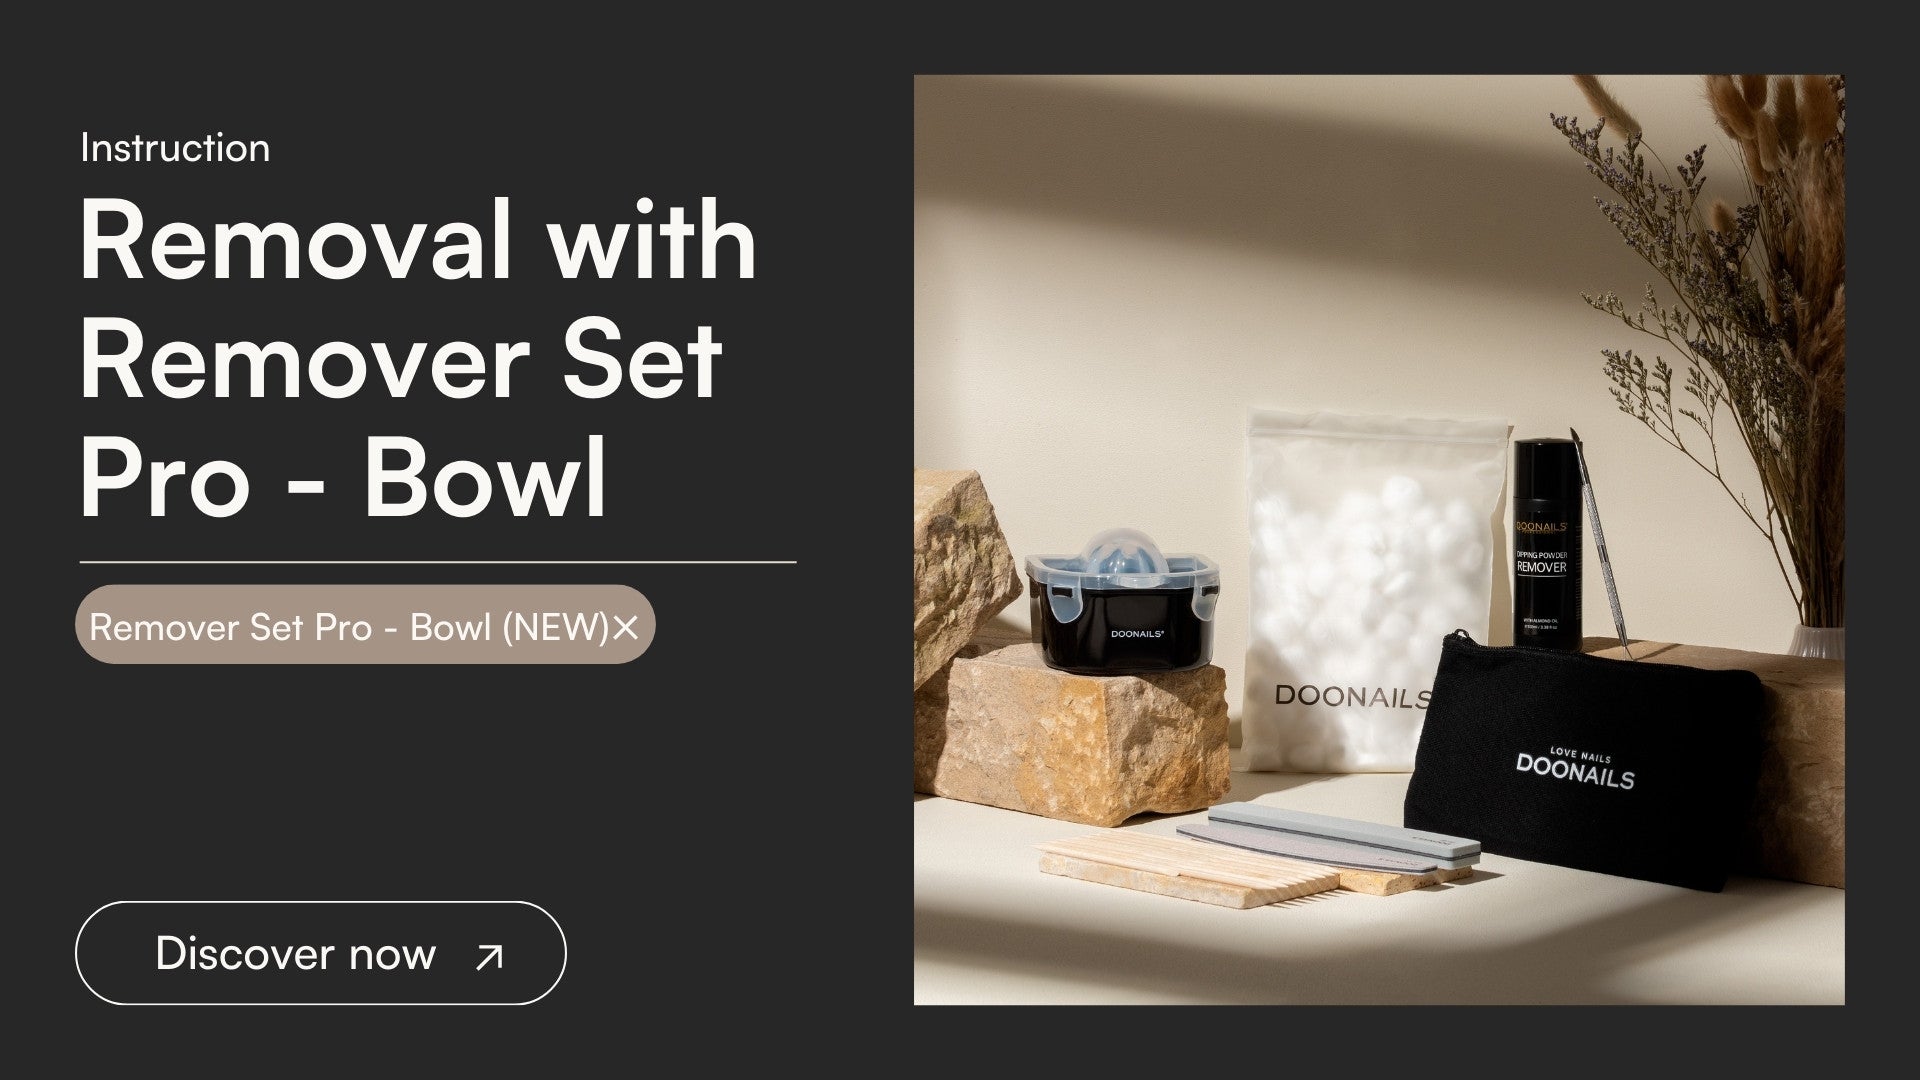 Remove Dipping Powder with the Pro Remover Set - Bowl